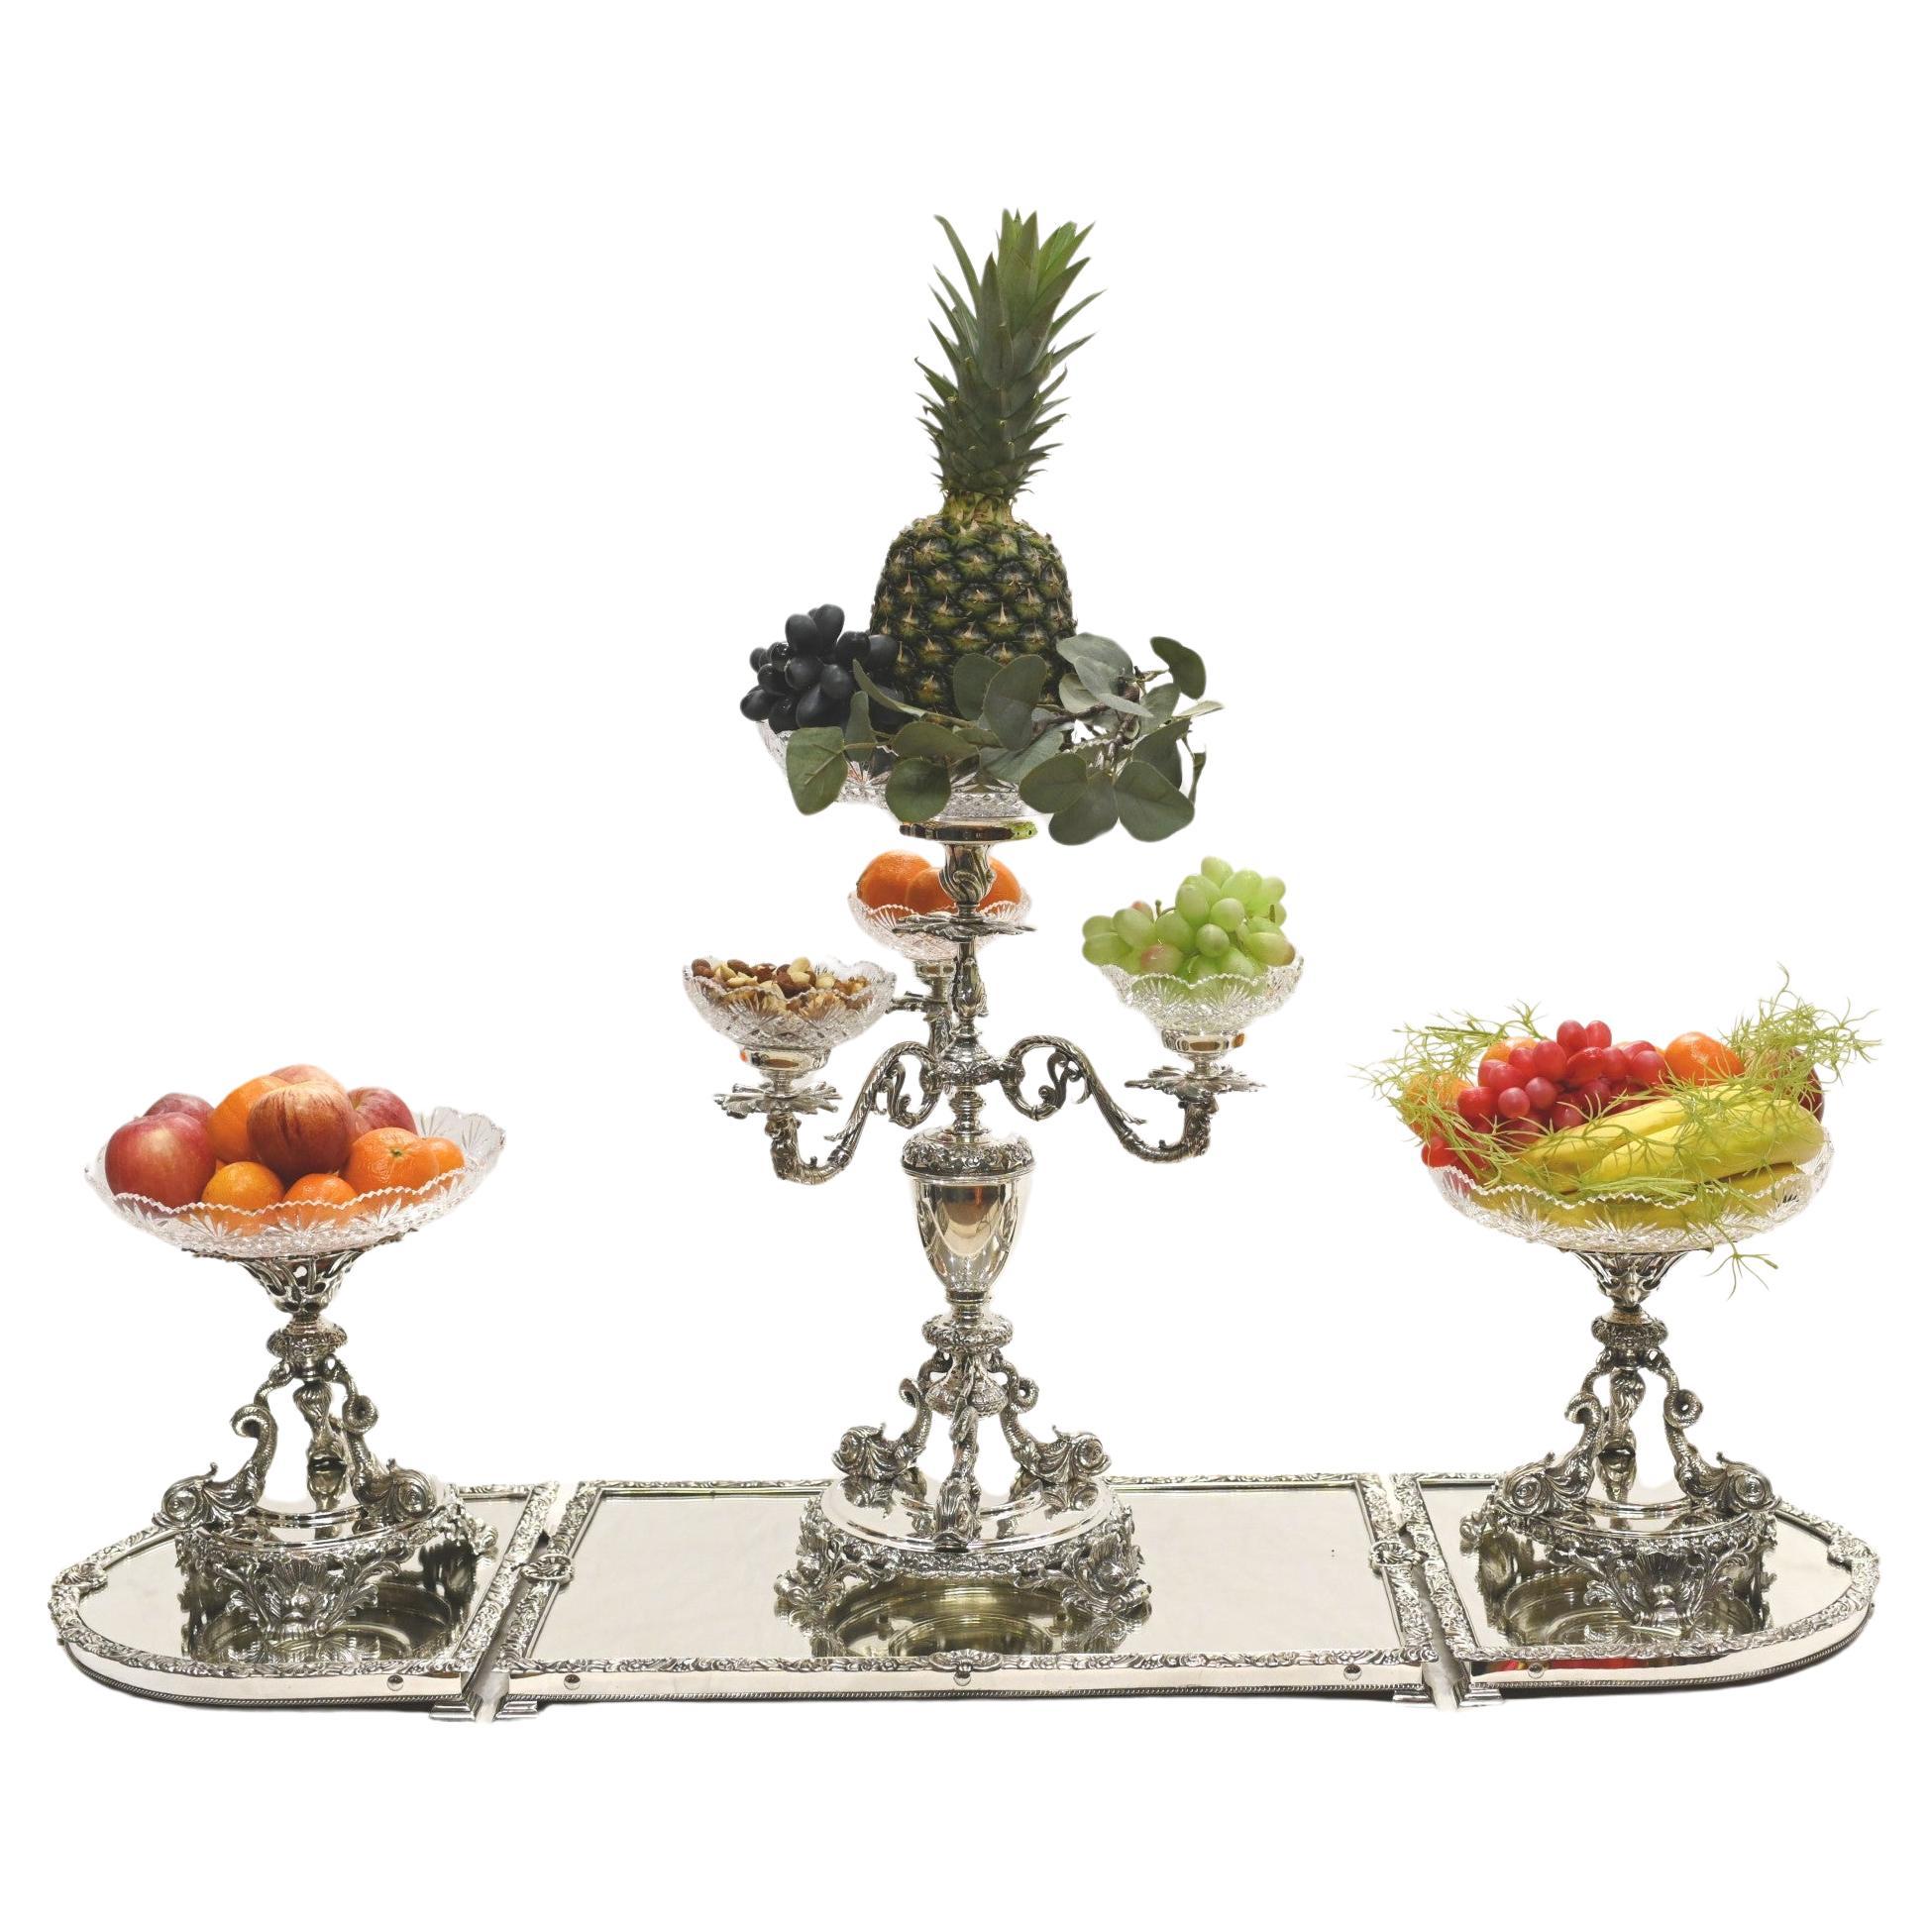 Stunning Sheffield silver plate centre piece or epergne
Great thing about this is there are two configurations to the central column - as a candlestick or glass bowl
Whole thing such a beautiful work of art and imagine this set up on your dining